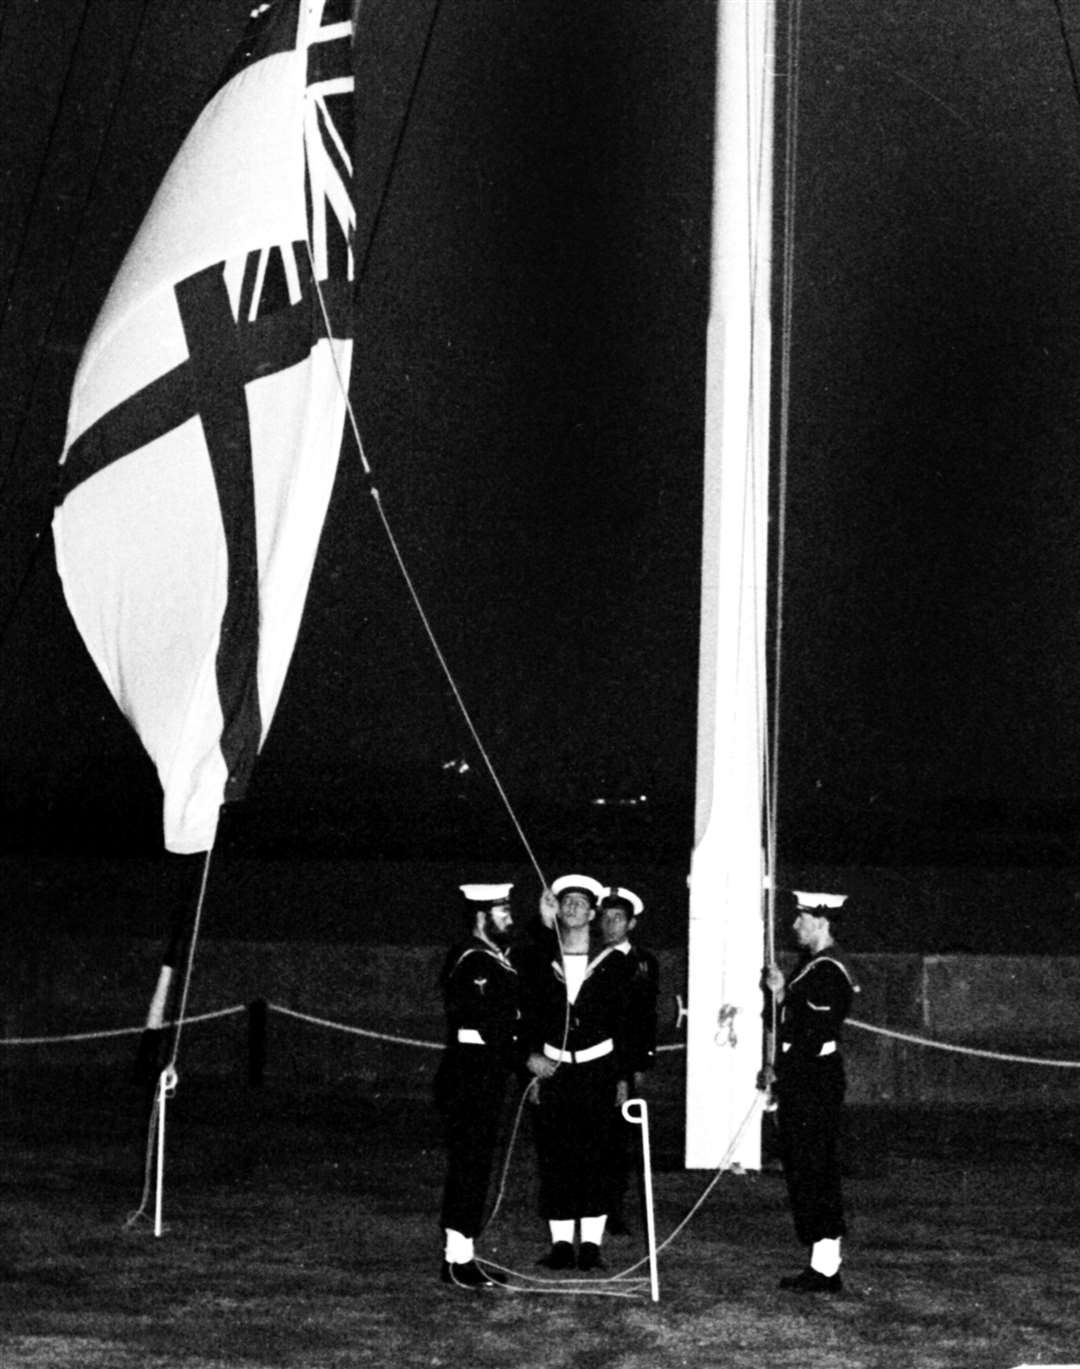 The flag comes down on 400 years of history....The flag at Chatham Dock Yard is lowered for the last time on October 3 1983 when the admiral left the Dockyard